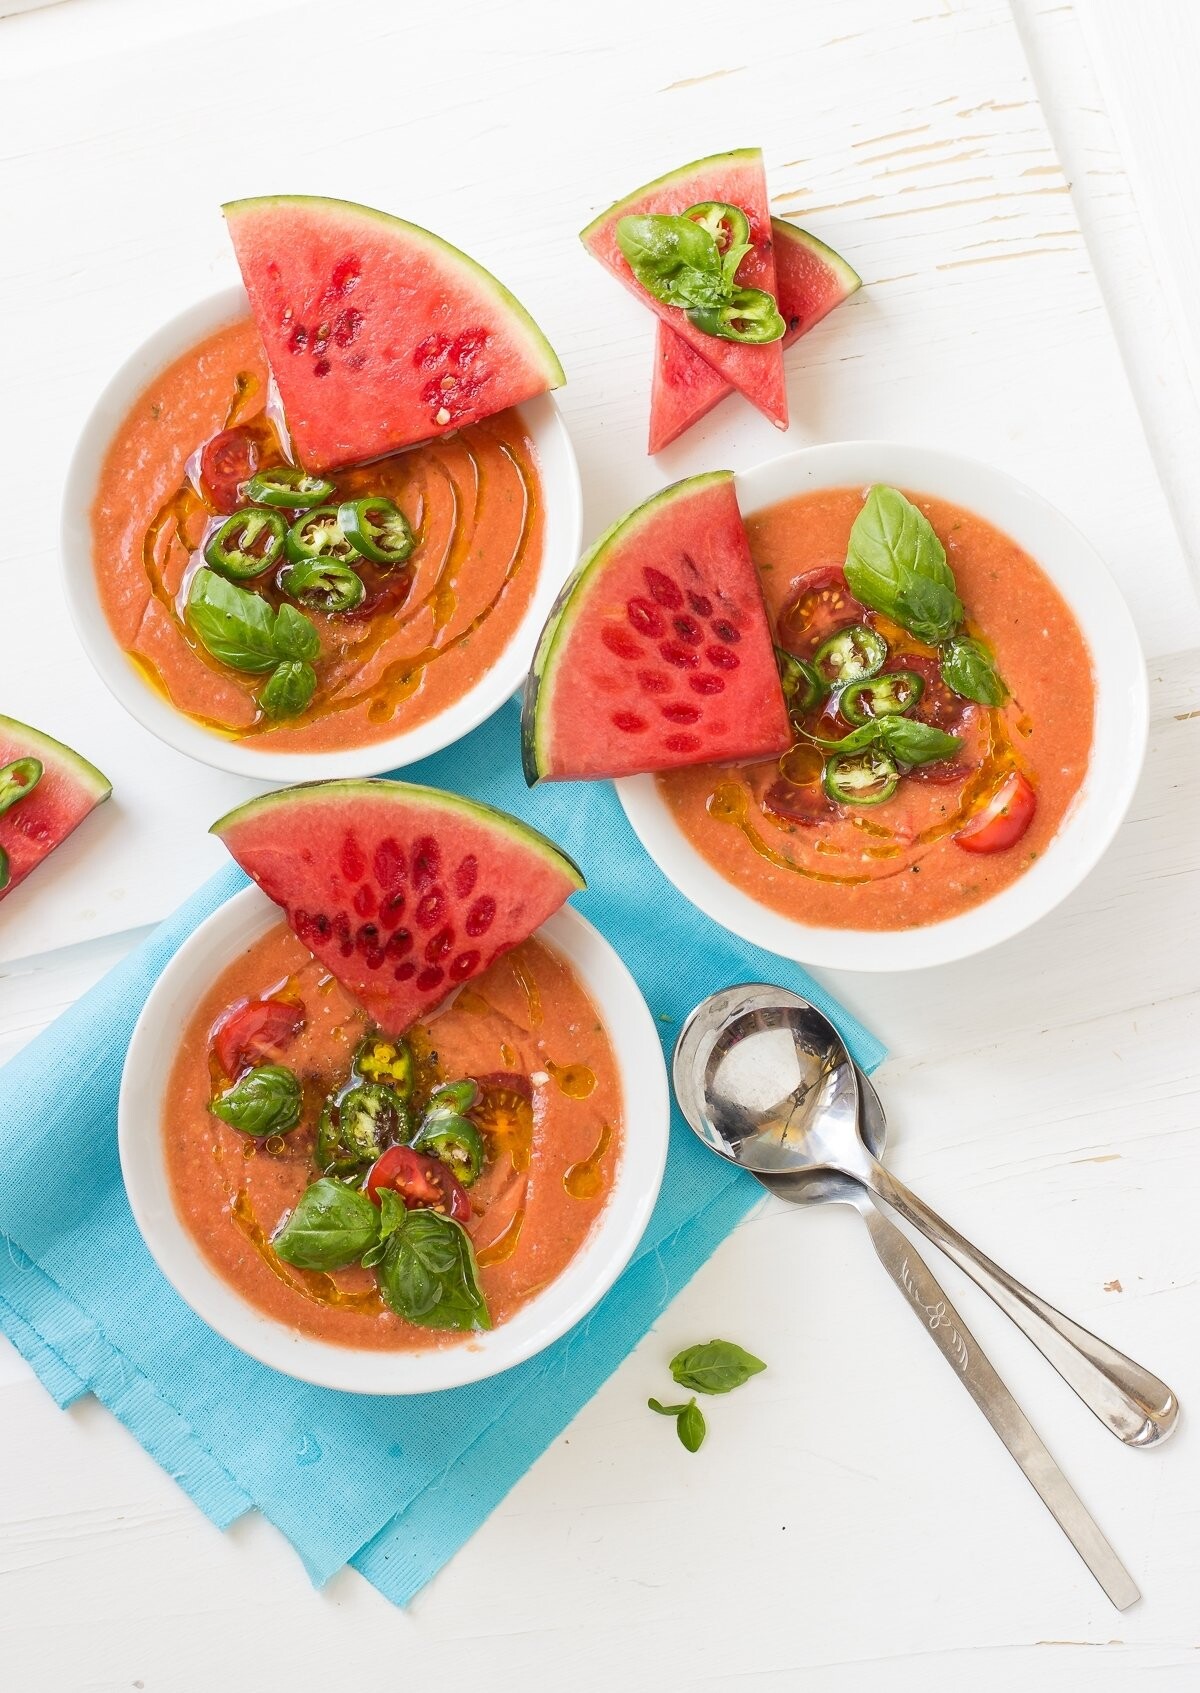 Watermelon gazpacho<br />
Recently summer in Poland is very hot, so cold soup is a must. This is a variation of traditional Spanish gazpacho made with watermelon, cherry tomatoes, hot green pepper and basil.